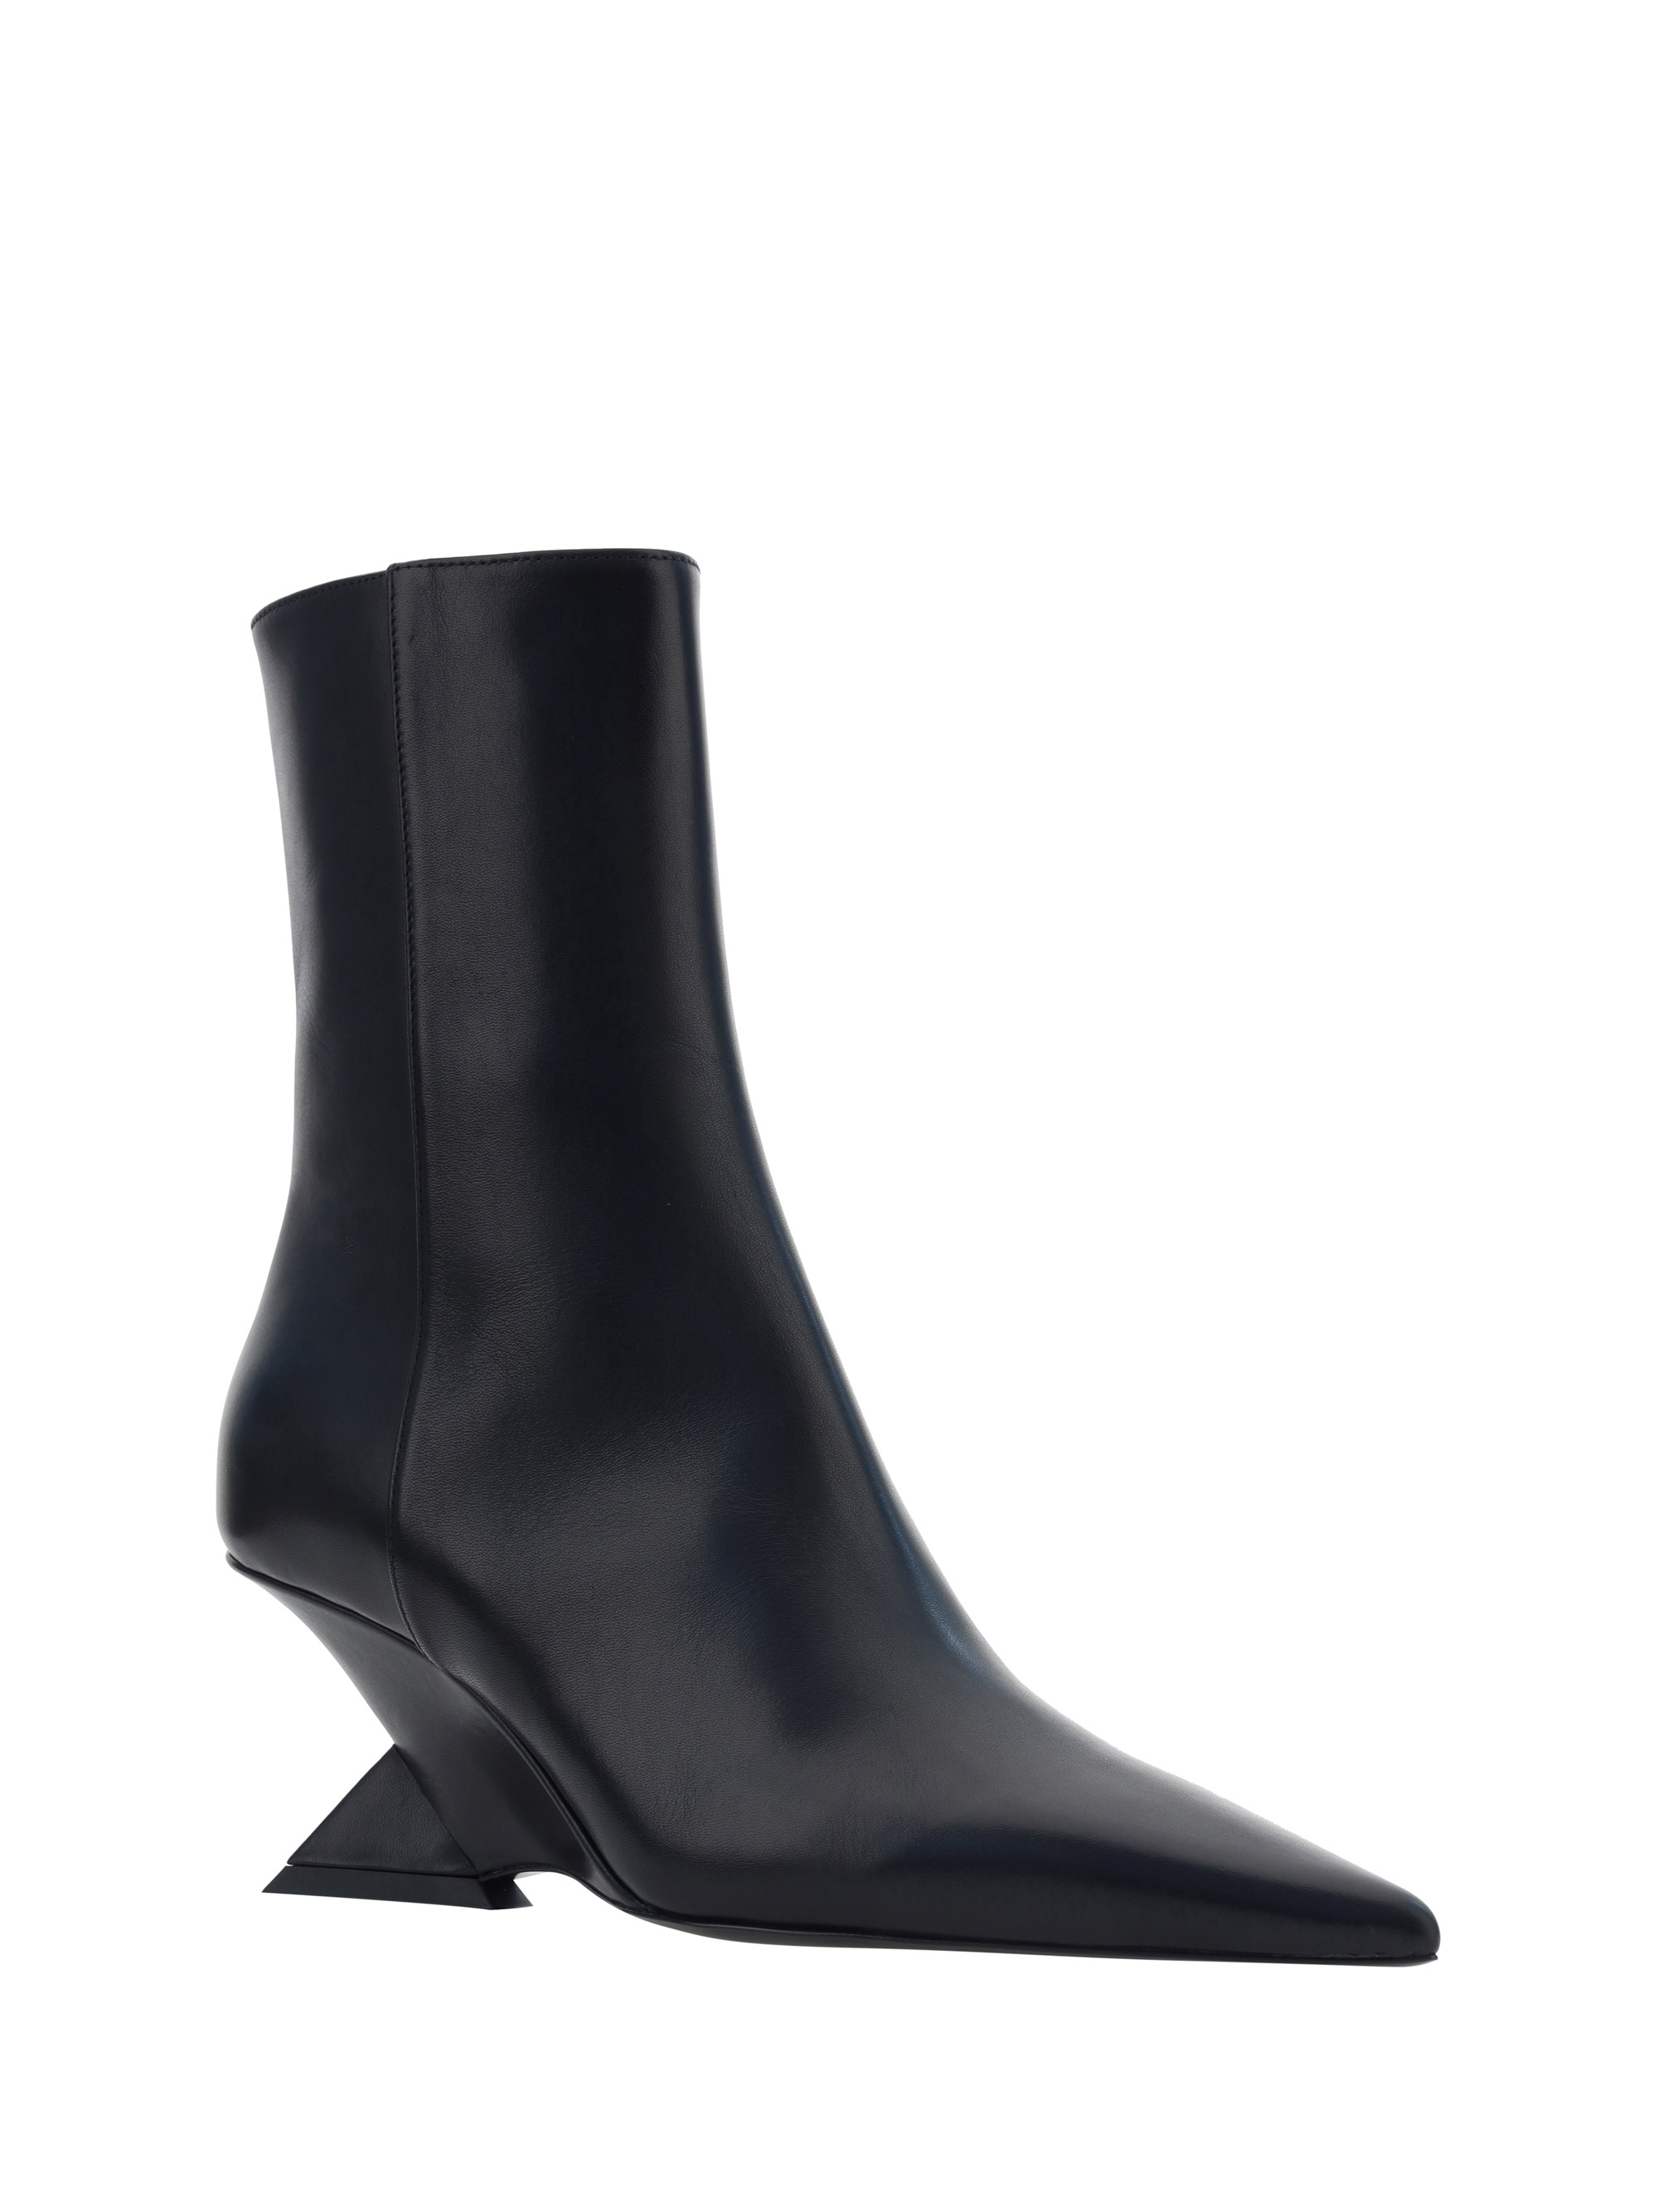 Maison Margiela Cut-out Heel Ankle Boots, Women's Fashion, Footwear, Boots  on Carousell